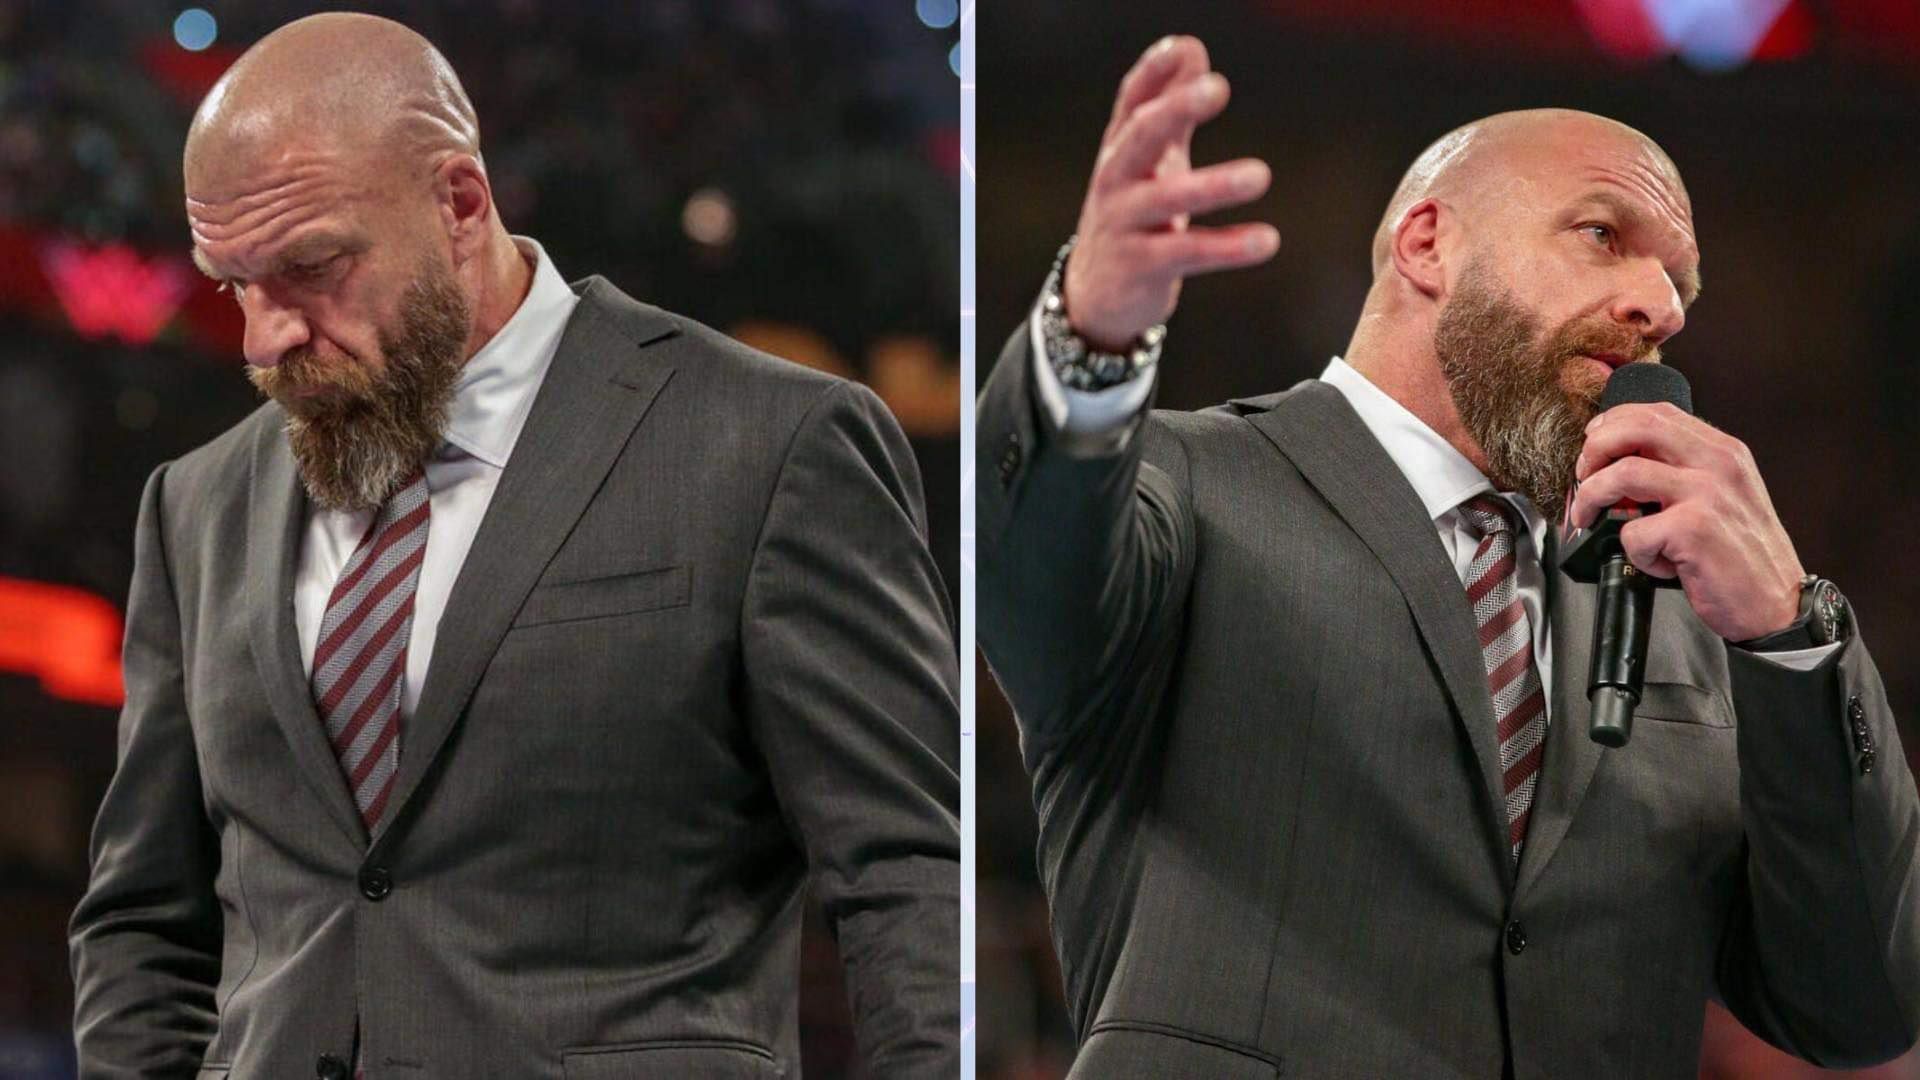 Triple H has changed a number of things in WWE over the last few months